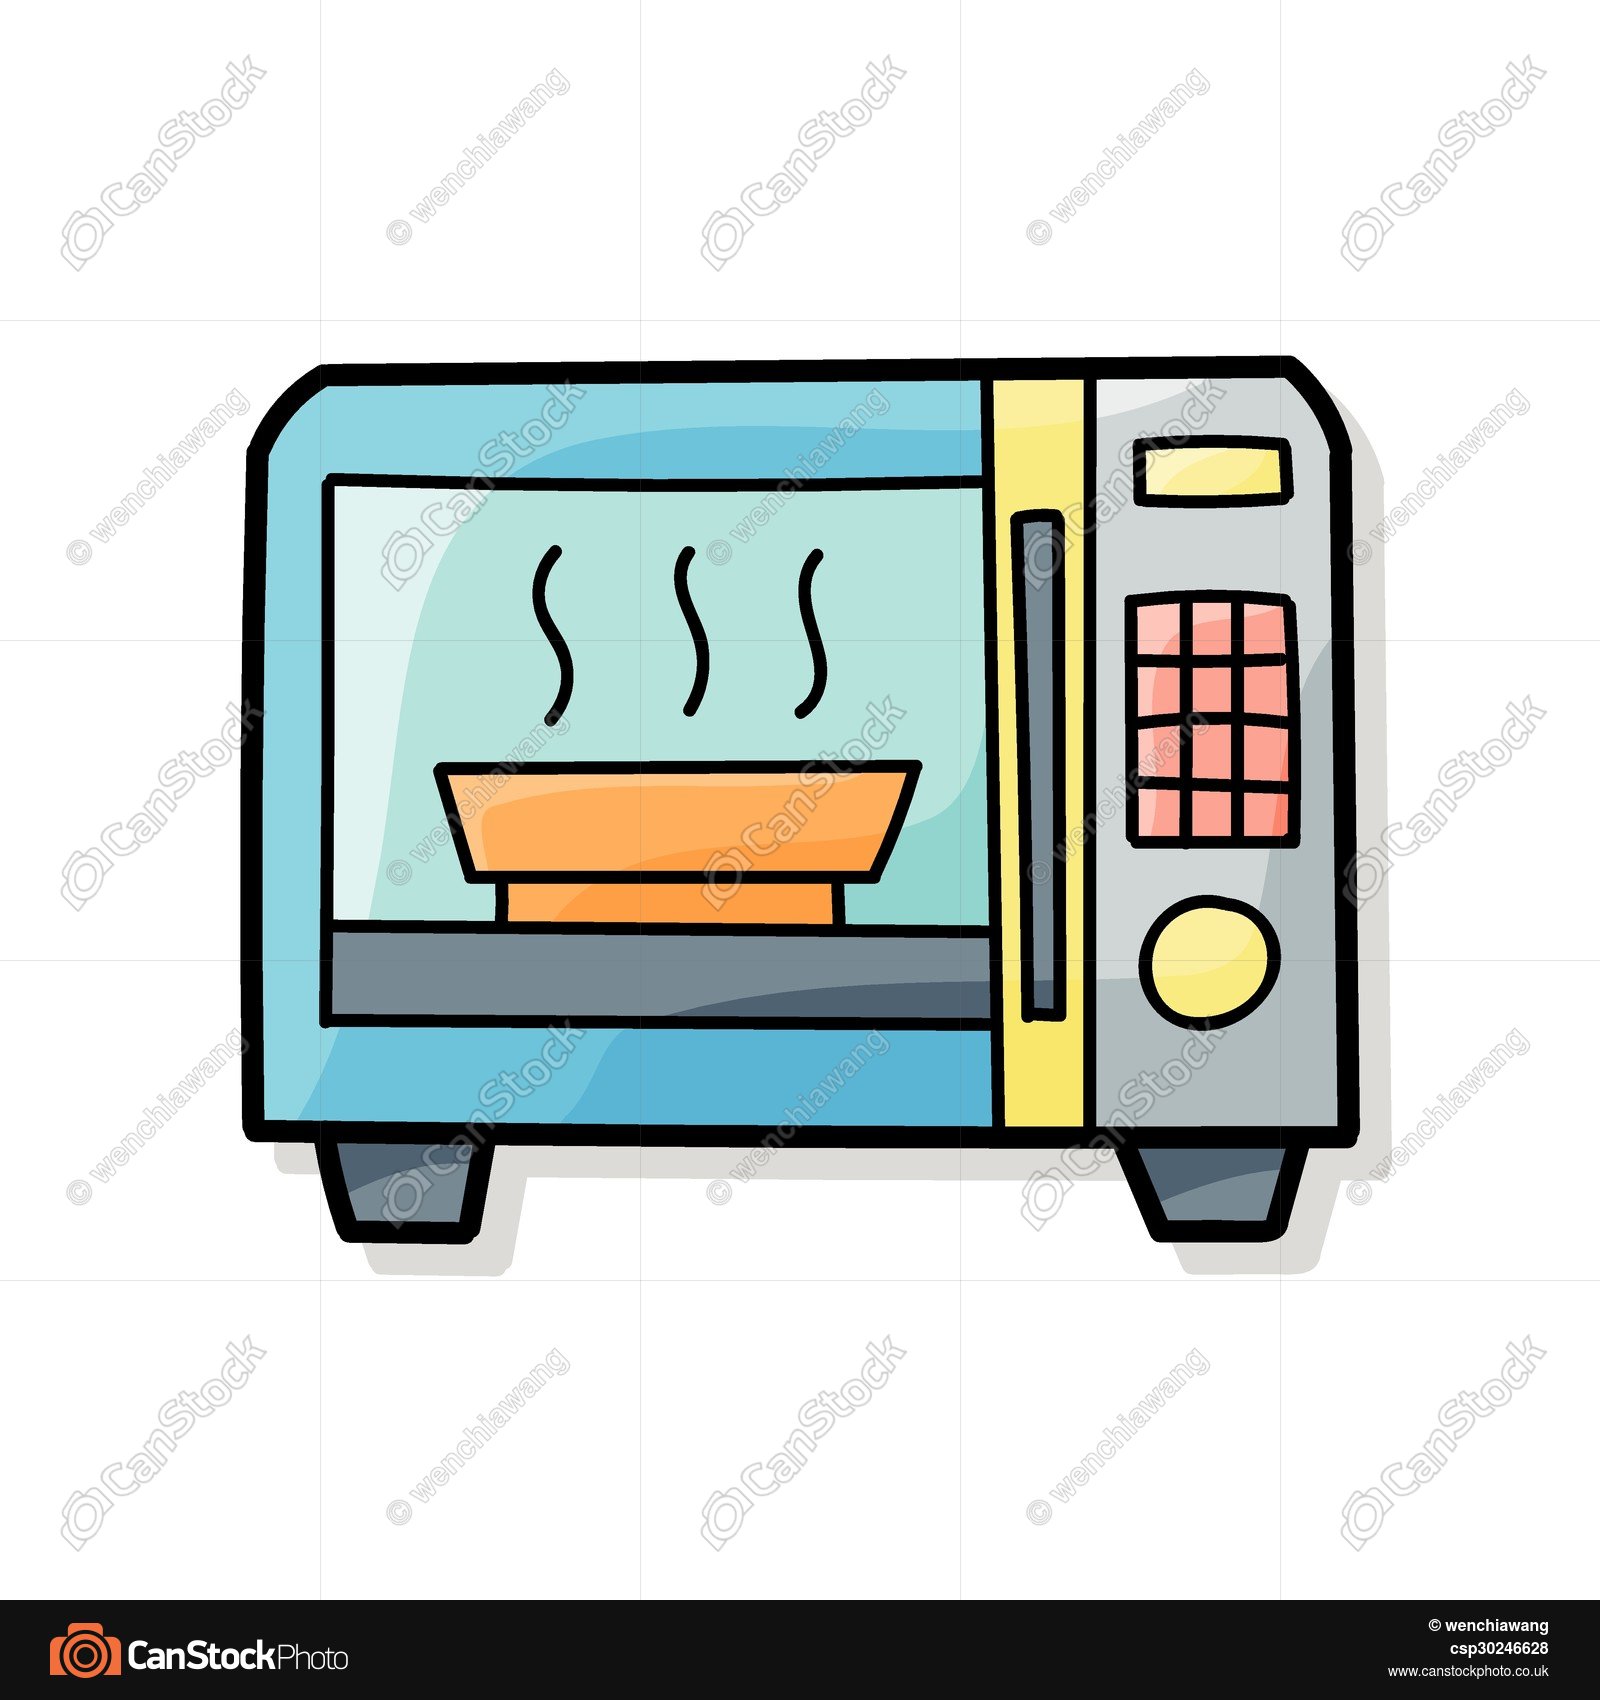 Free Microwave Cliparts, Download Free Microwave Cliparts png images